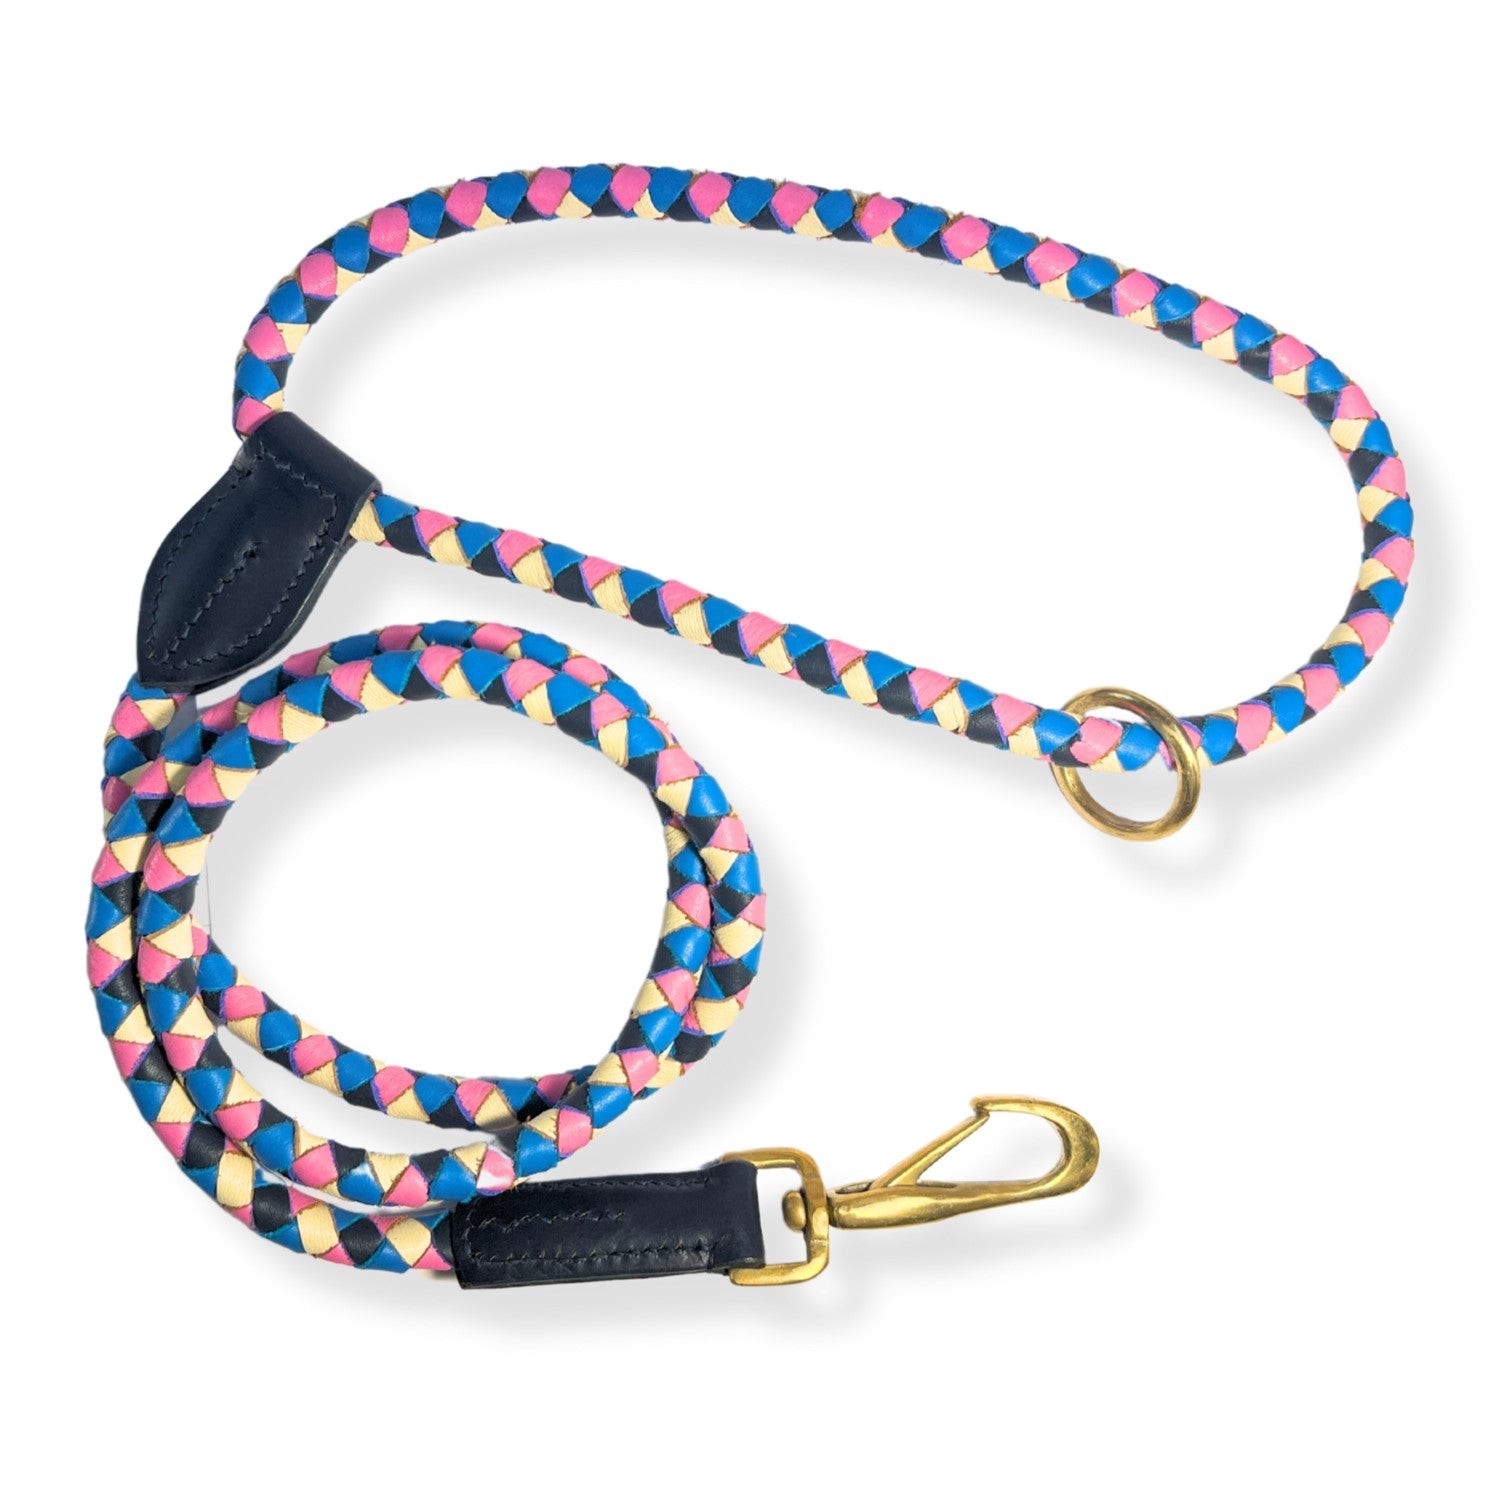 A Beach Lead by Georgie Paws, with a geometric pattern and black leather accents, designed for dog trainers, isolated on a white background.